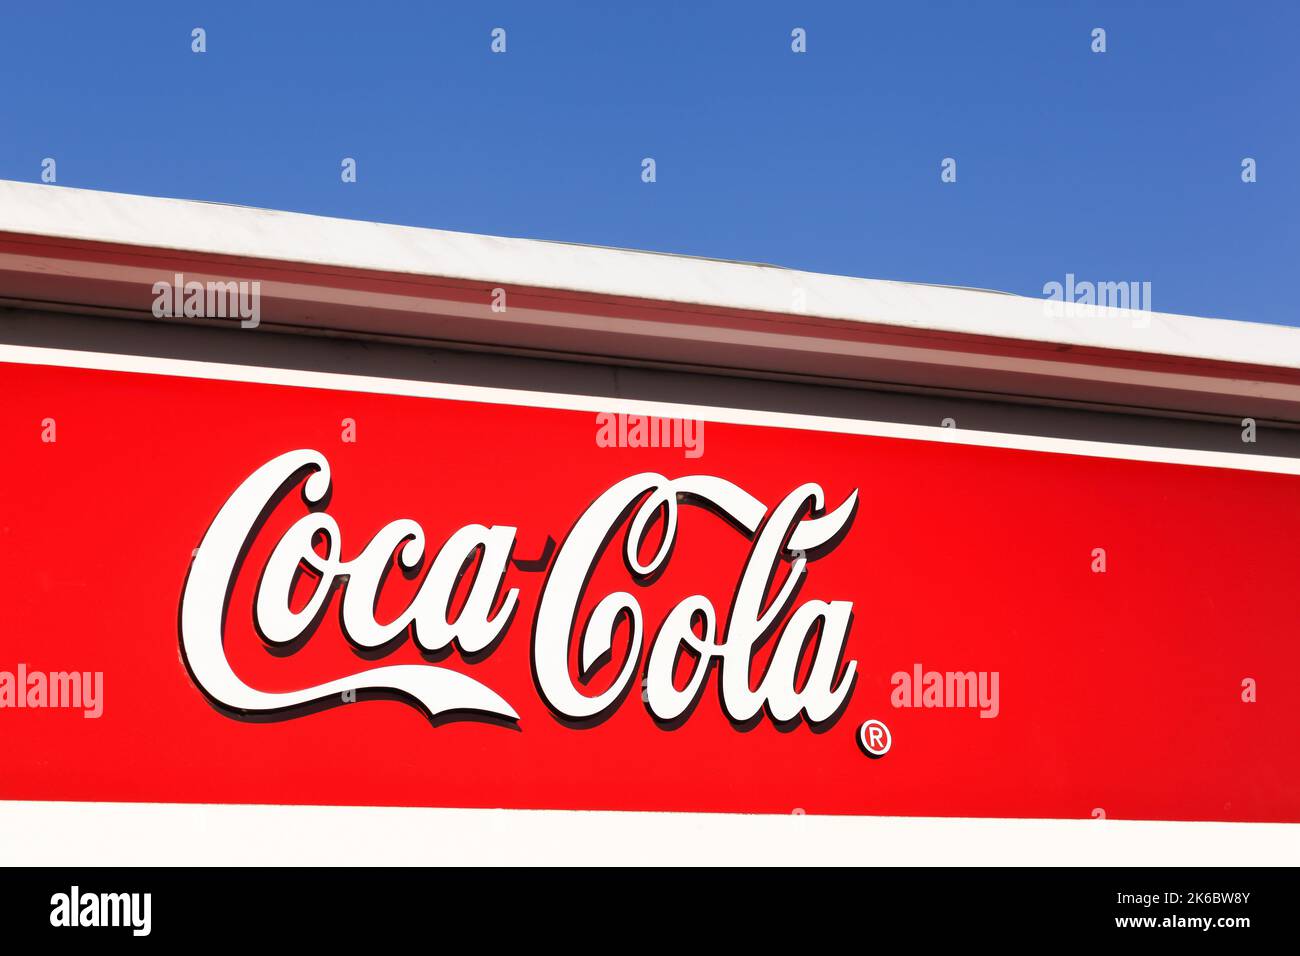 Hou, Denmark - February 15, 2016: Coca-Cola is a carbonated soft drink. It is produced by The Coca-Cola Company of Atlanta, Georgia Stock Photo